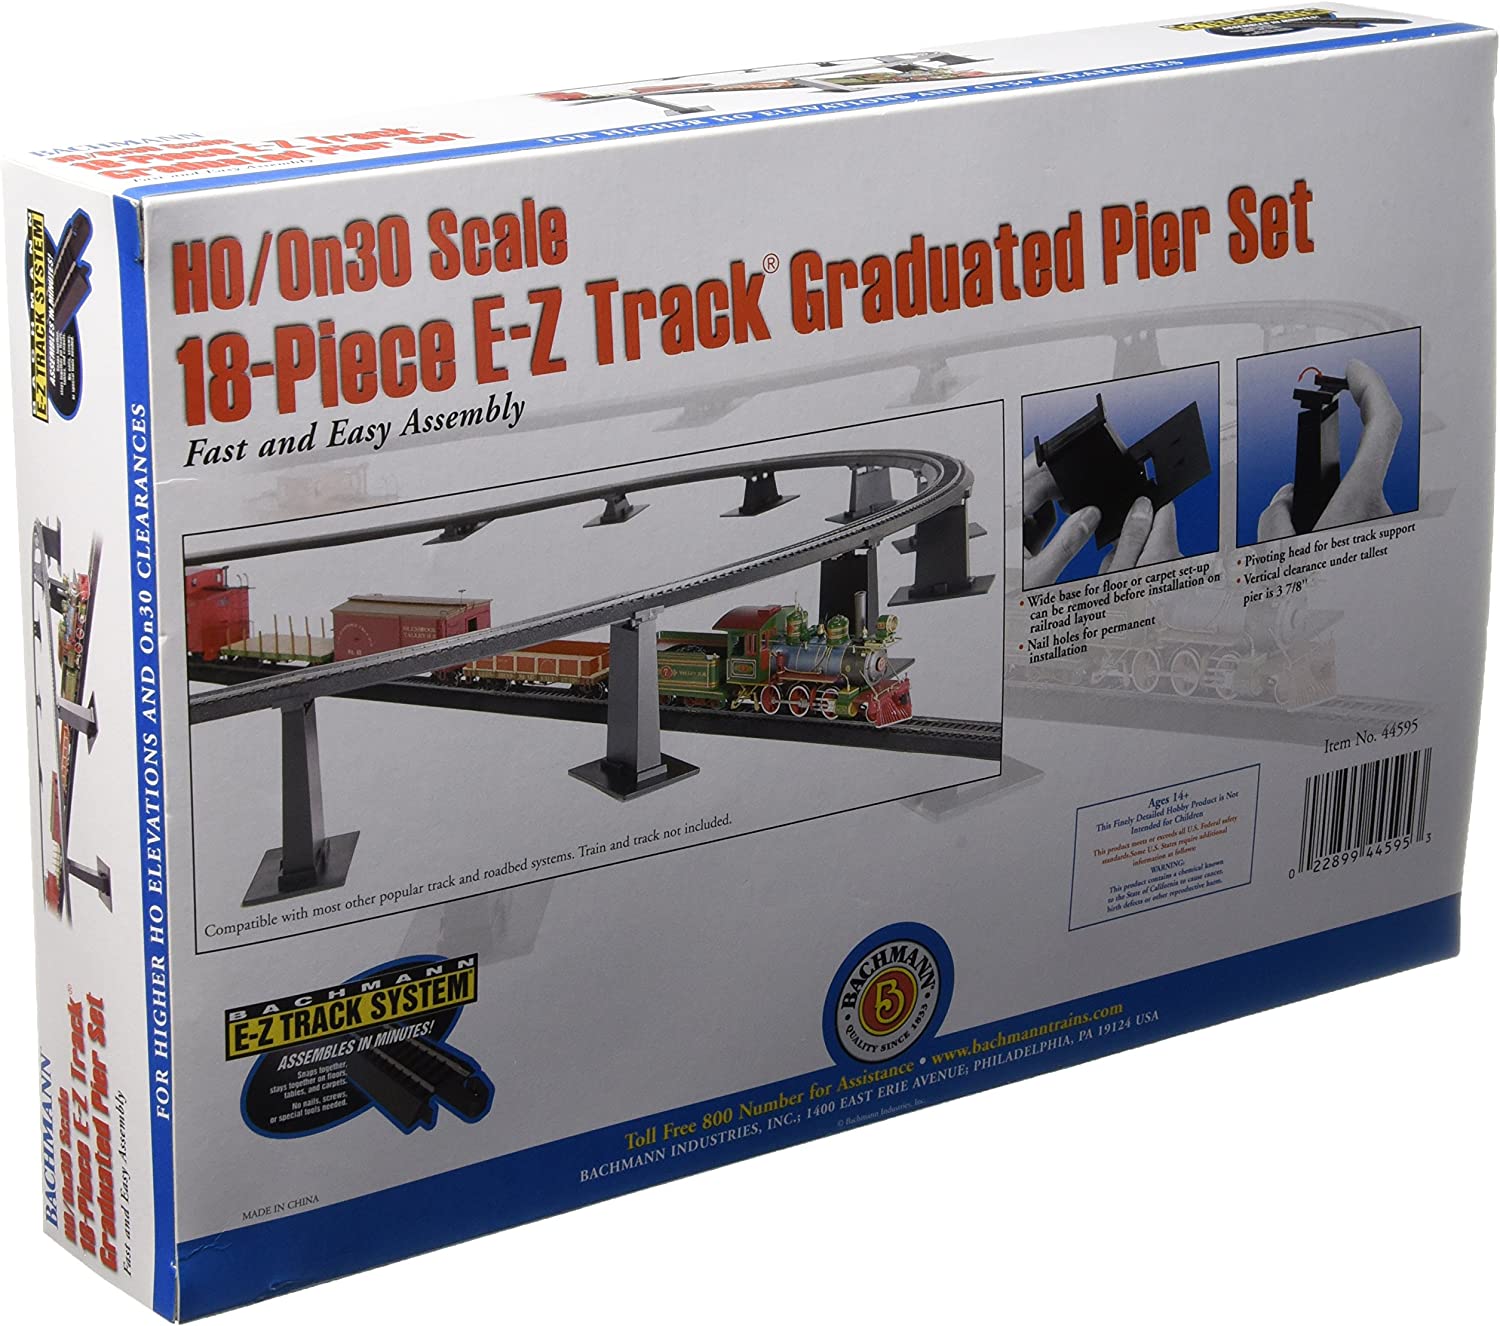 Bachmann 44595 HO Scale E-Z TRACK 18 PC Graduated Pier Set (compatible with On30) - image 2 of 2